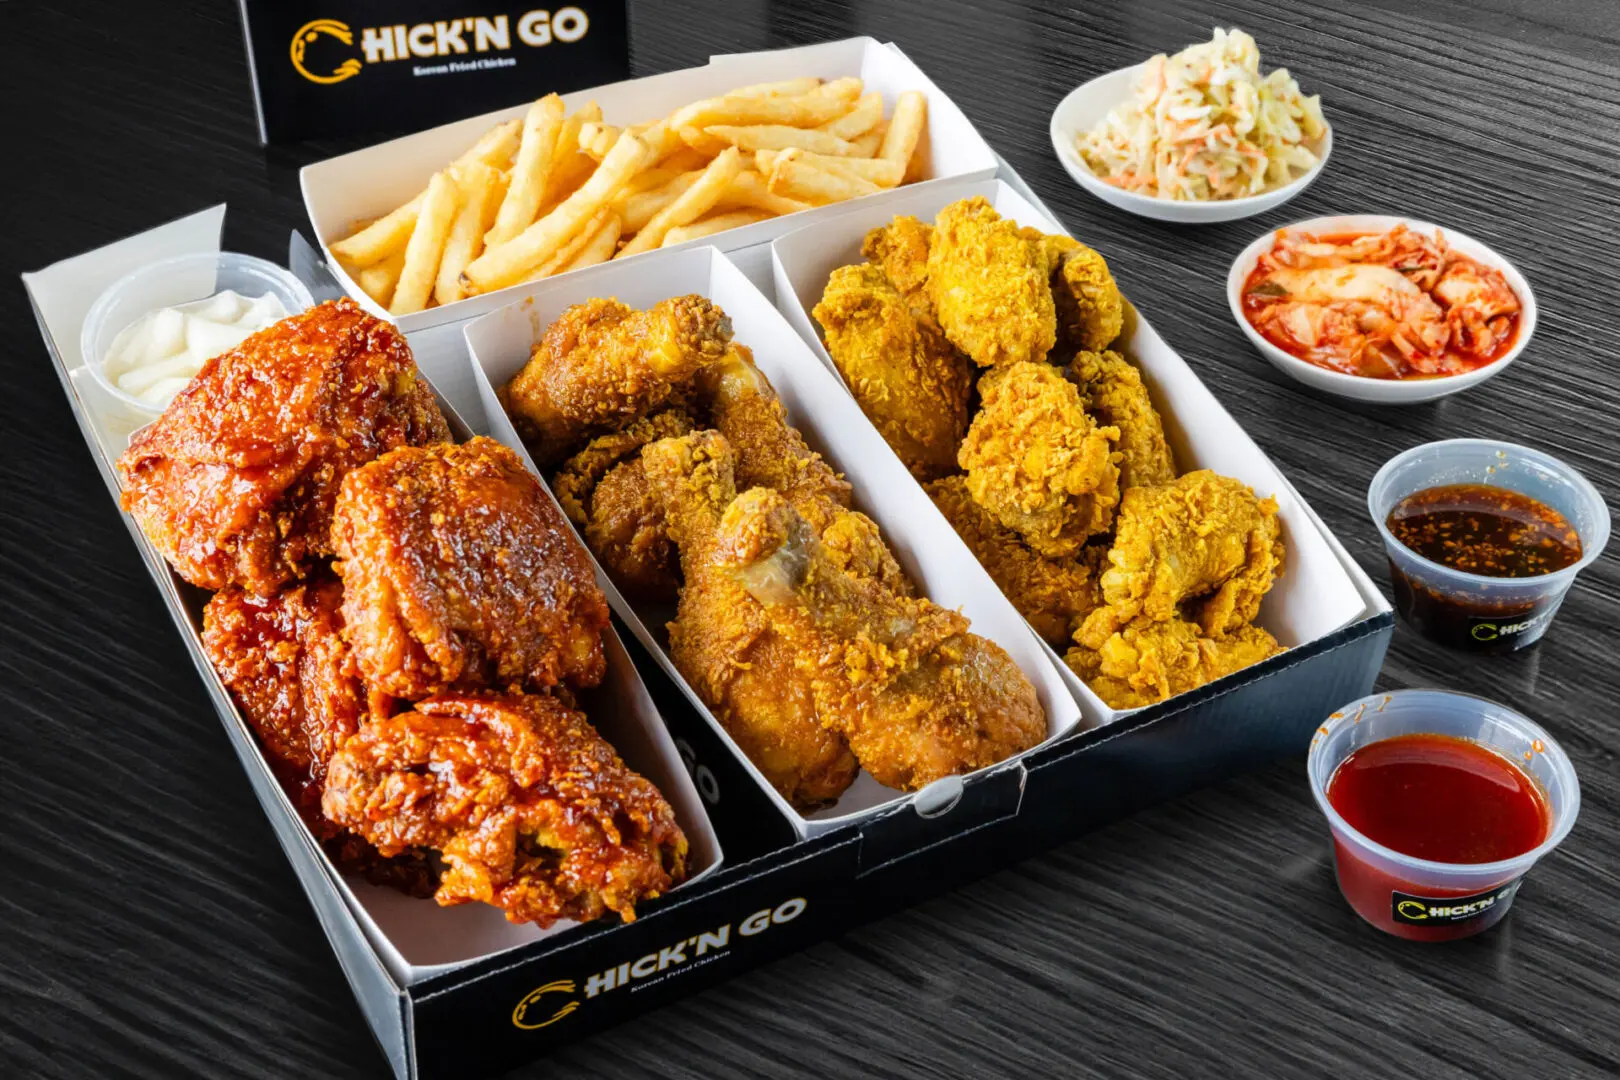 A box of fried chicken and fries with sides.